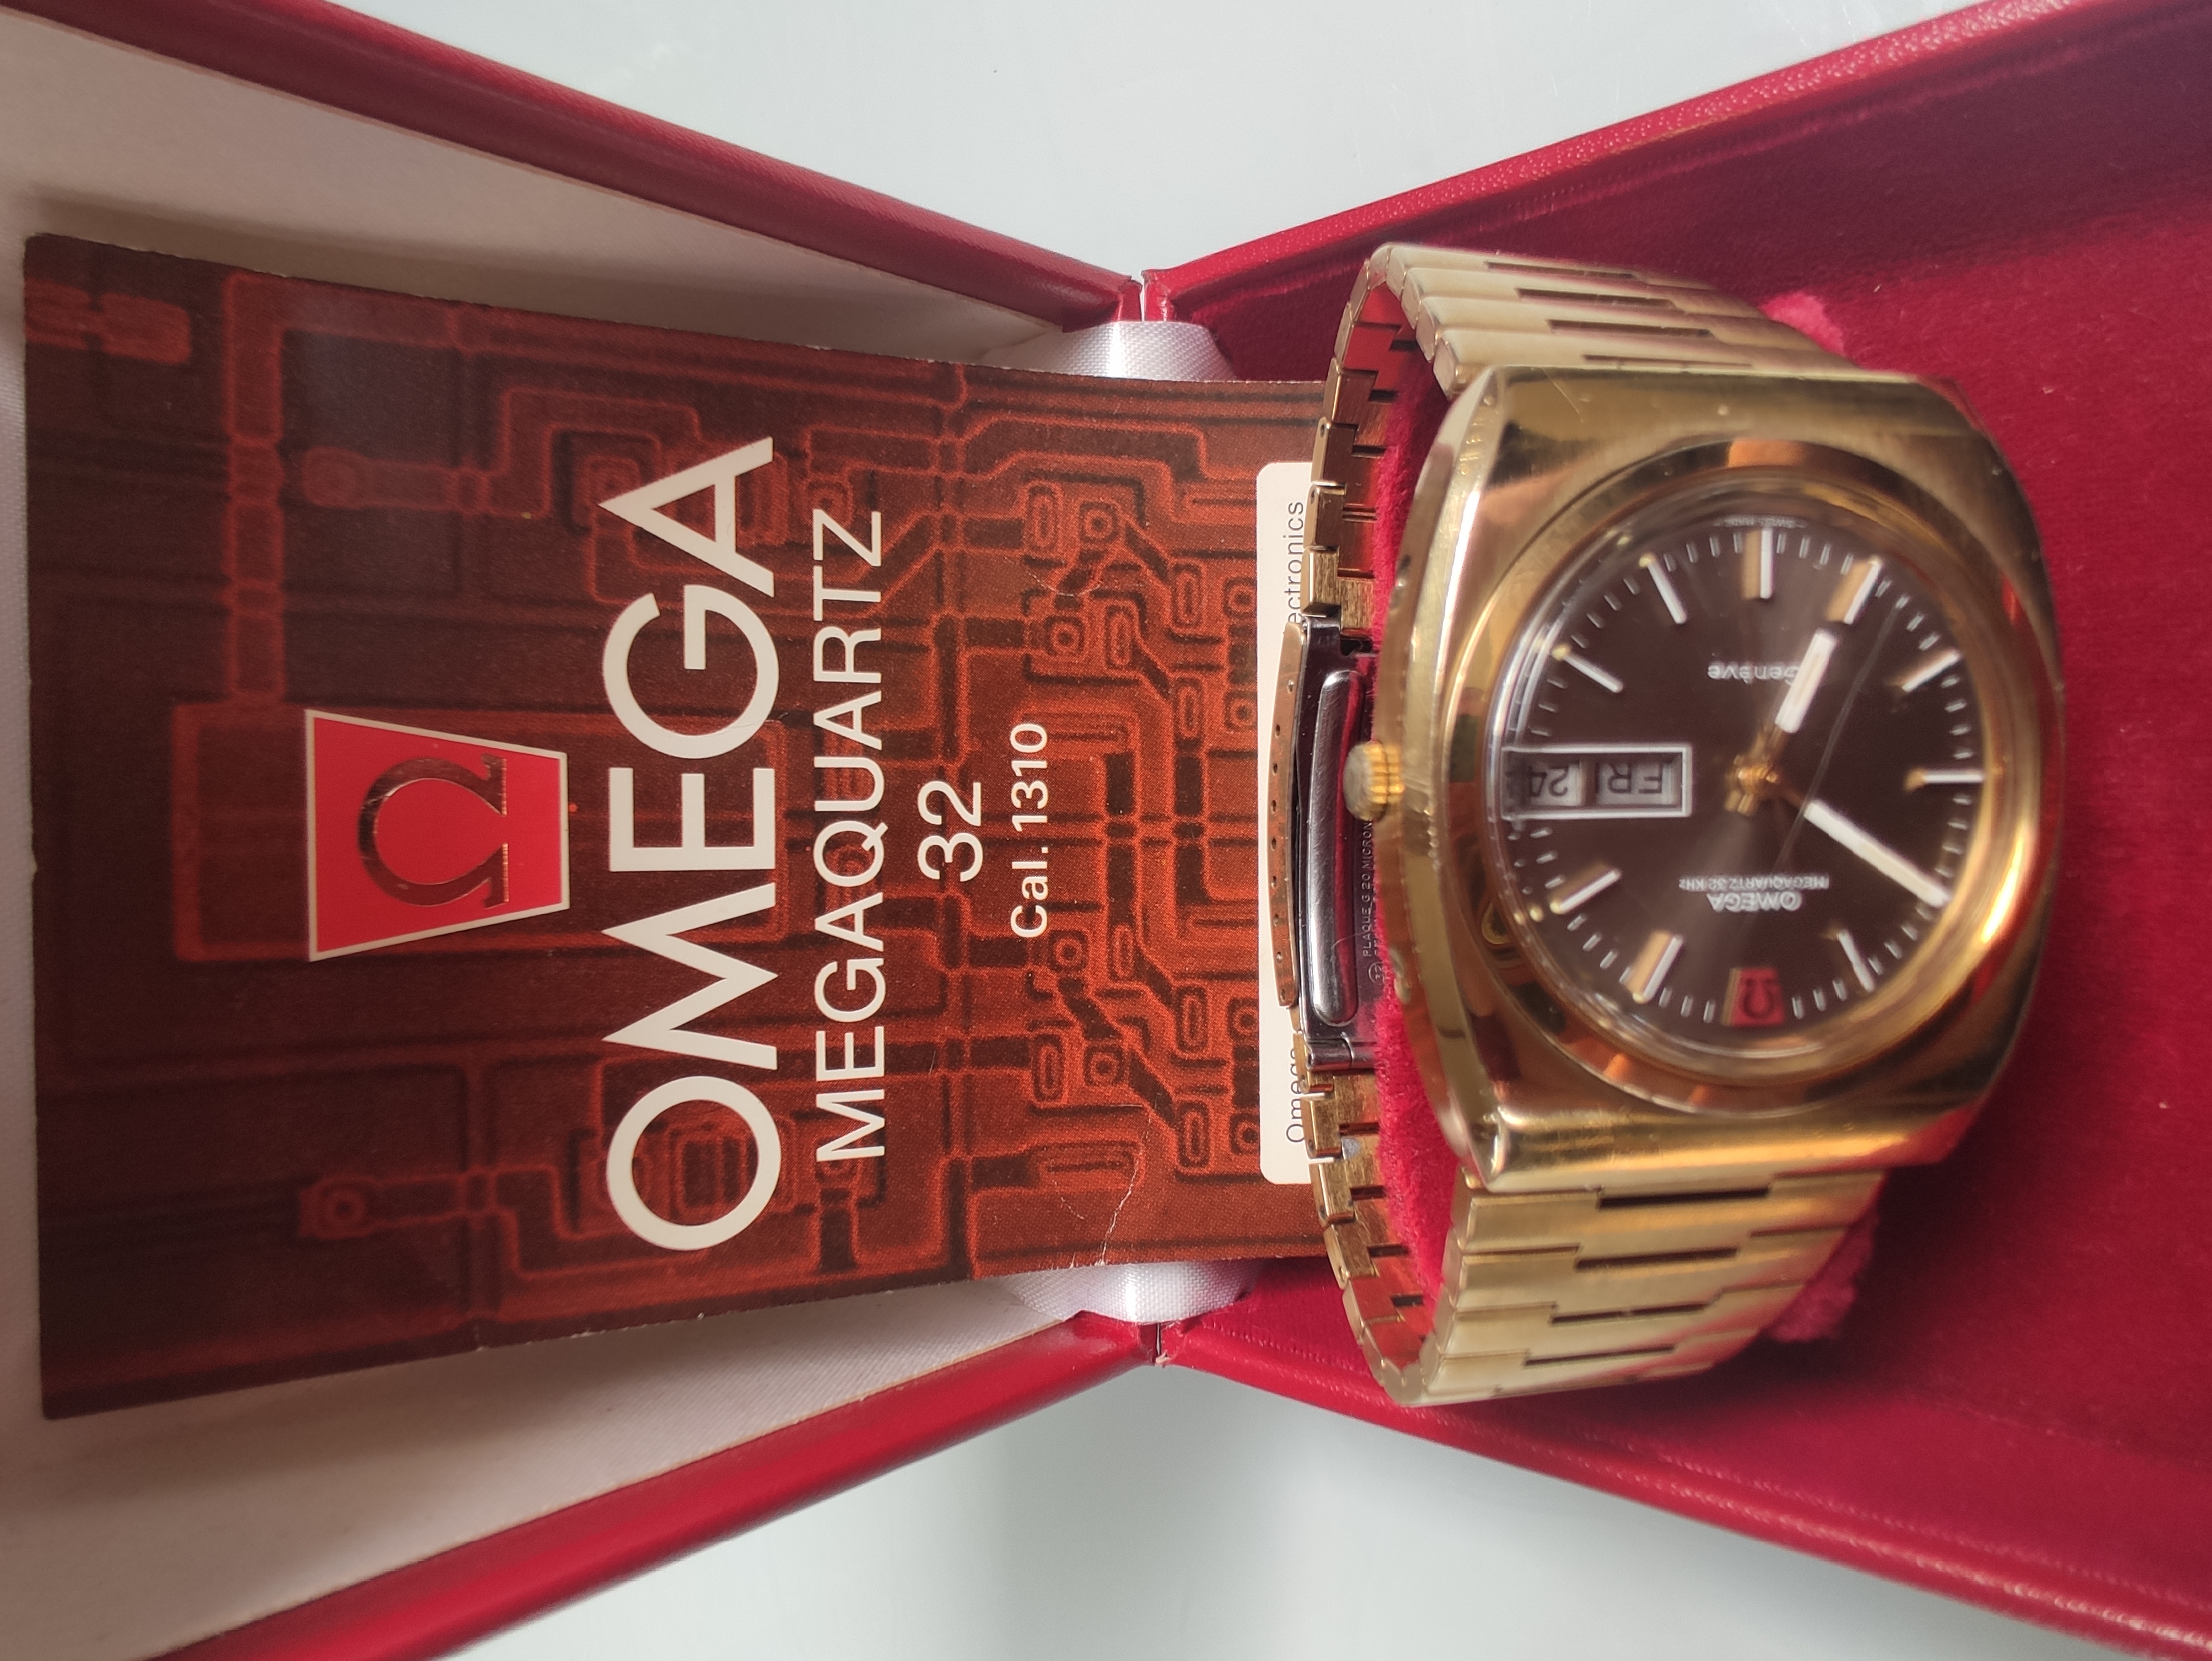 Omega Megaquartz 32 Gentlemans Watch Circa 1974 With Very Rare Gold plated Omega Strap.